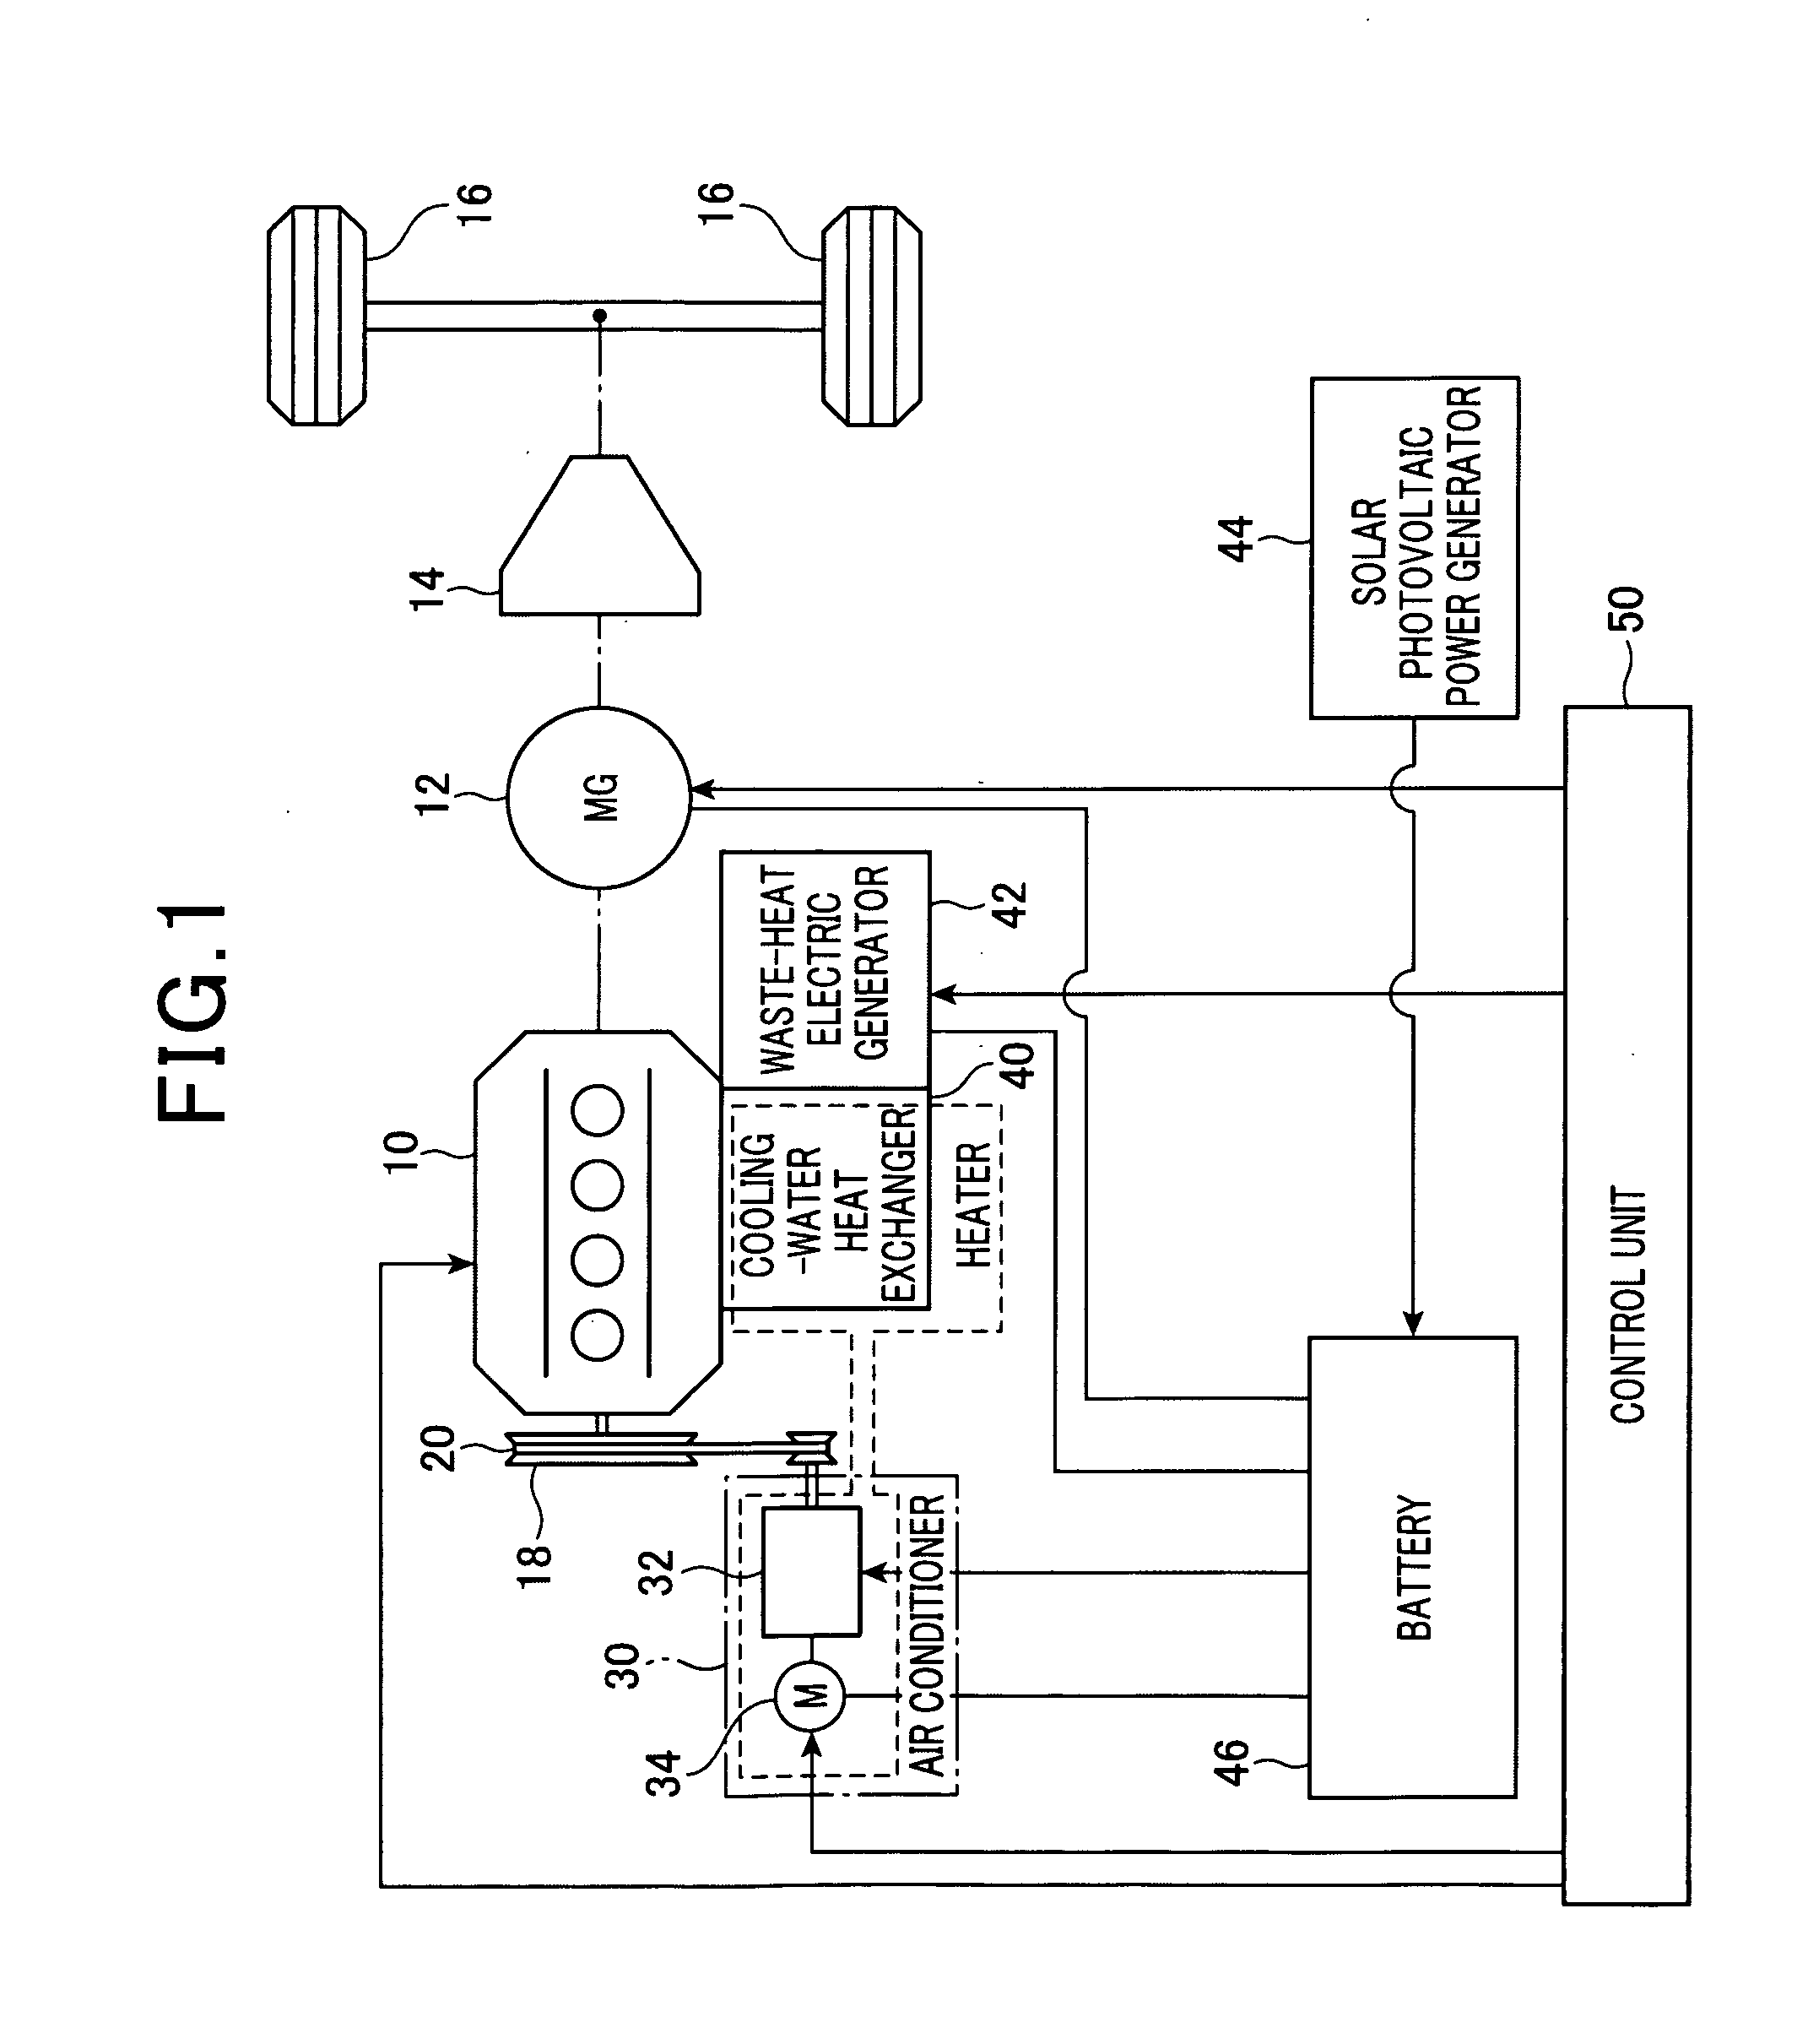 Apparatus for managing energy supplied to functional device units realizing a specific function